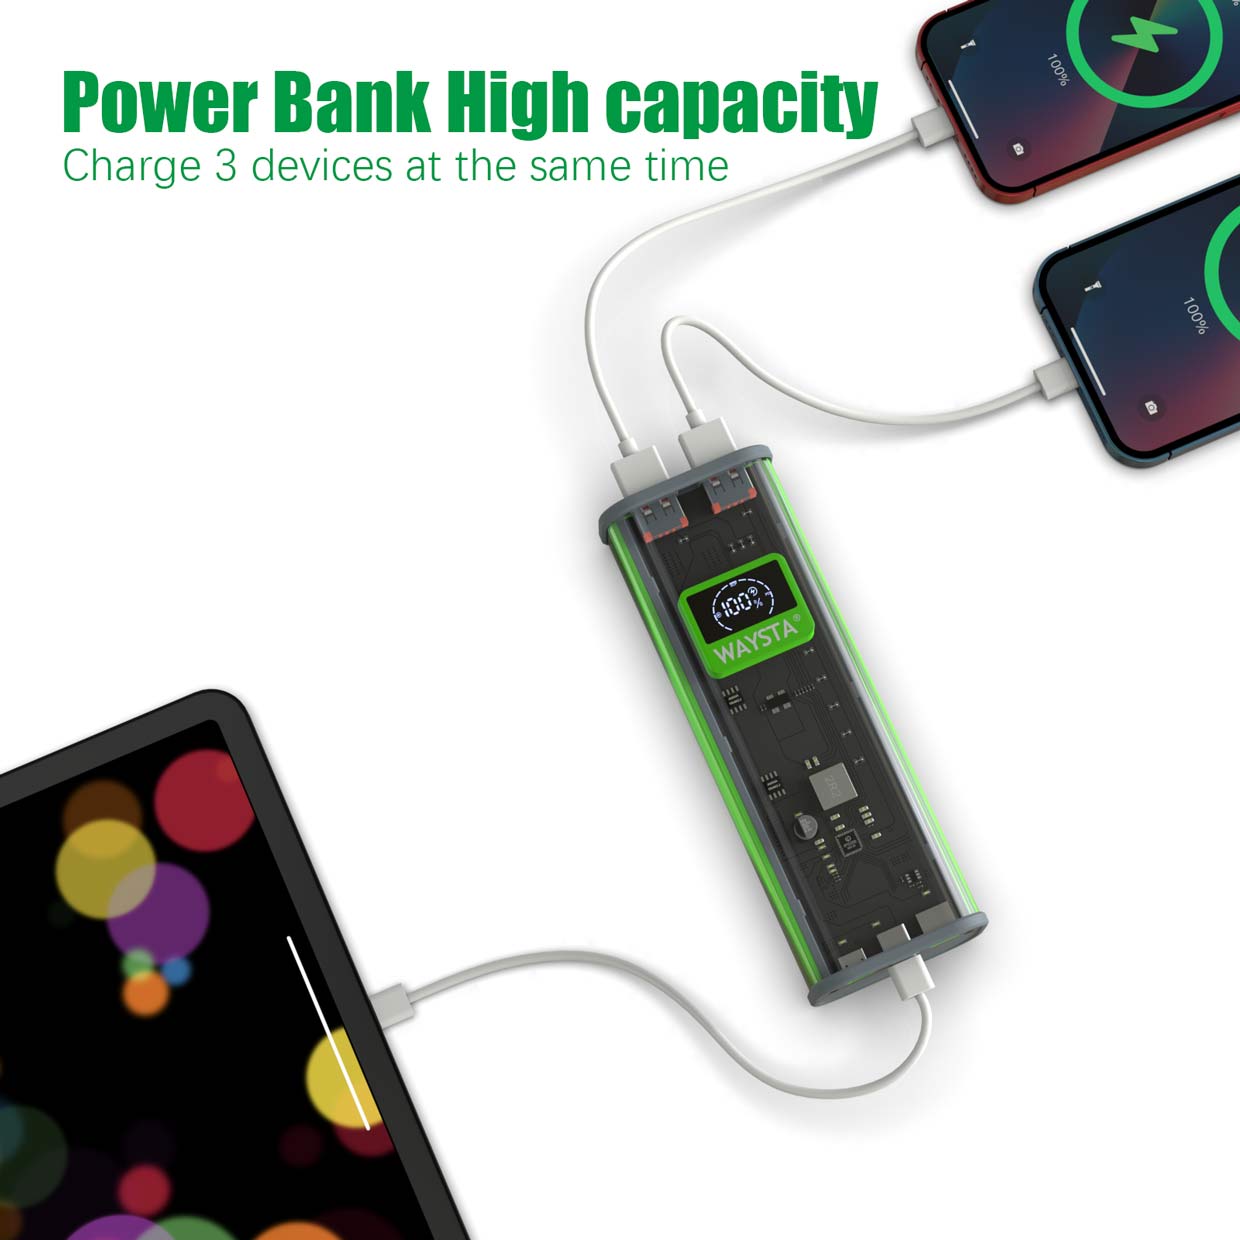 Power Bank 26800mAh, portable charger, 22.5W and PD 20W fast charging battery pack, Powerbank digital smart display  TYPE-C input/output Portable Charger for iphone, ipad, Samsung, Huawei, Smartphones etc.